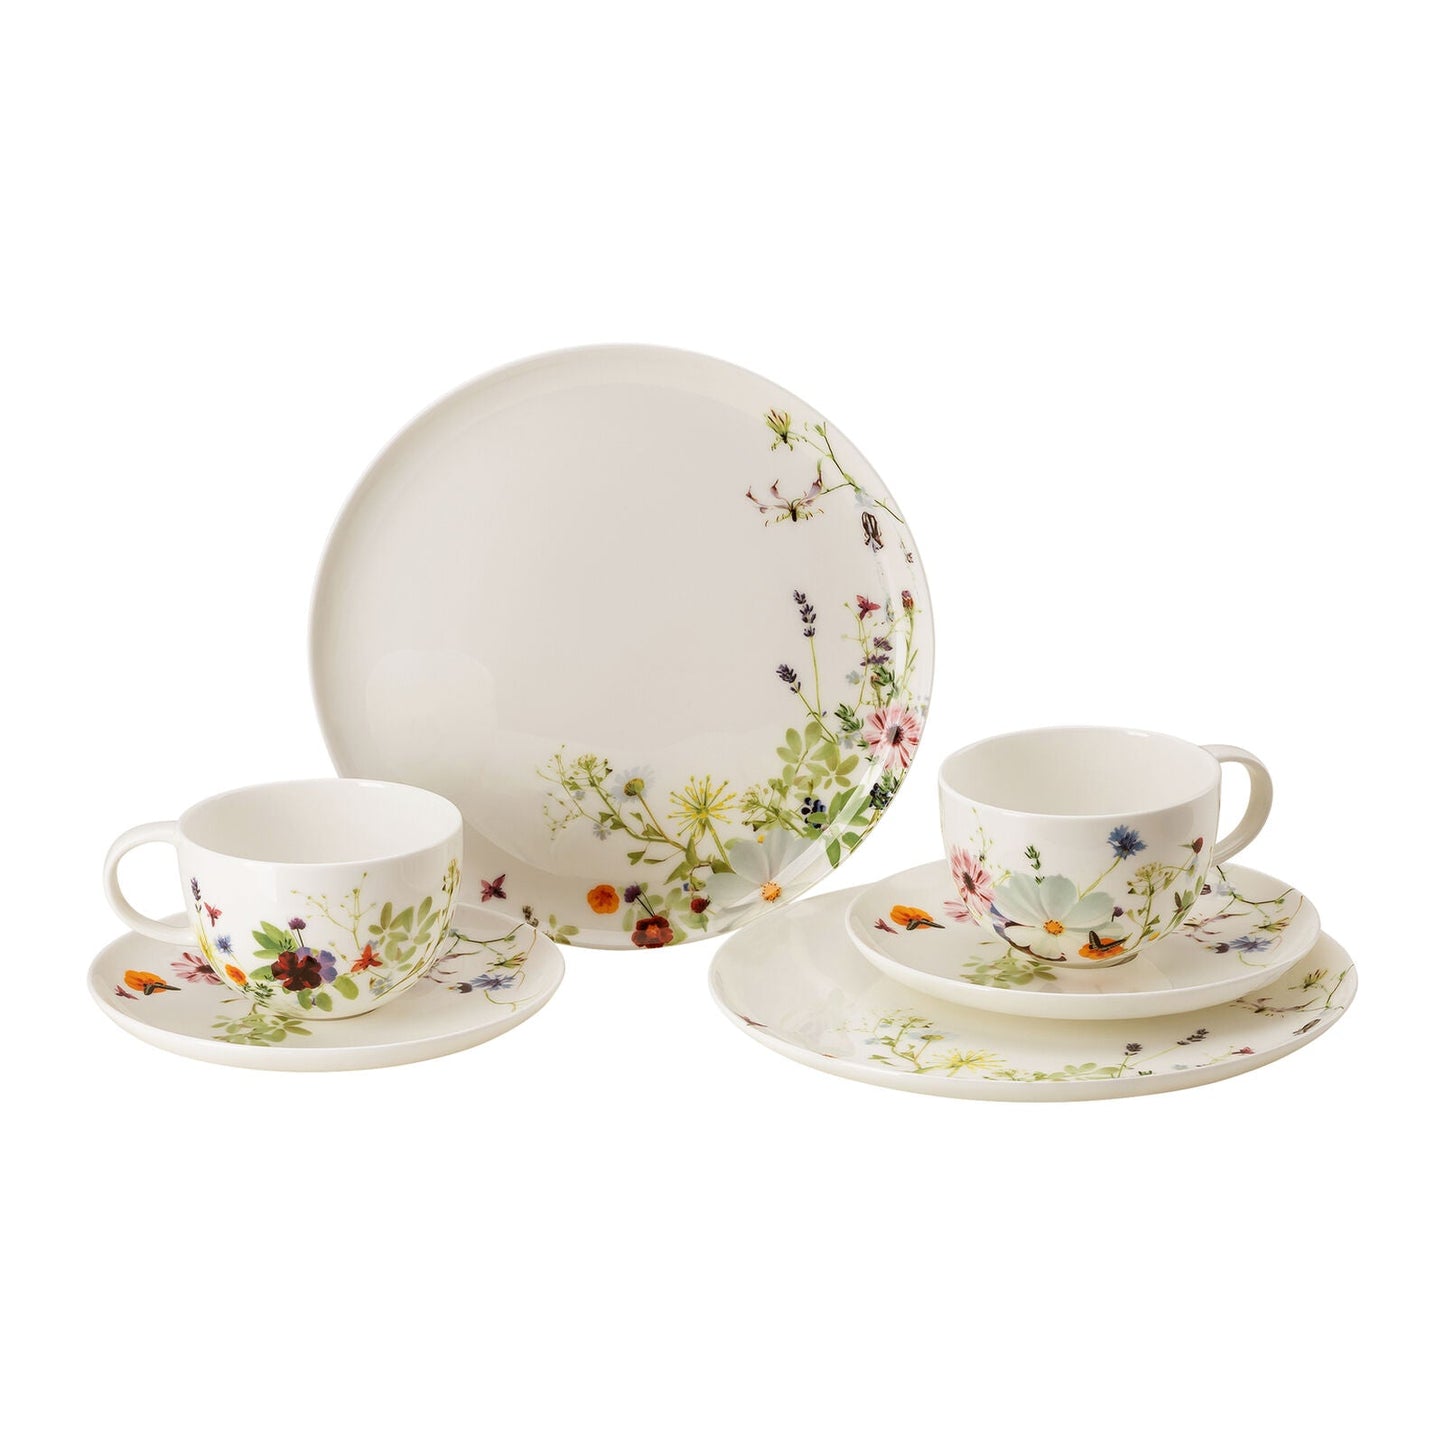 Set 6 Pieces with Combi Cups & Saucers and Coupe Plates